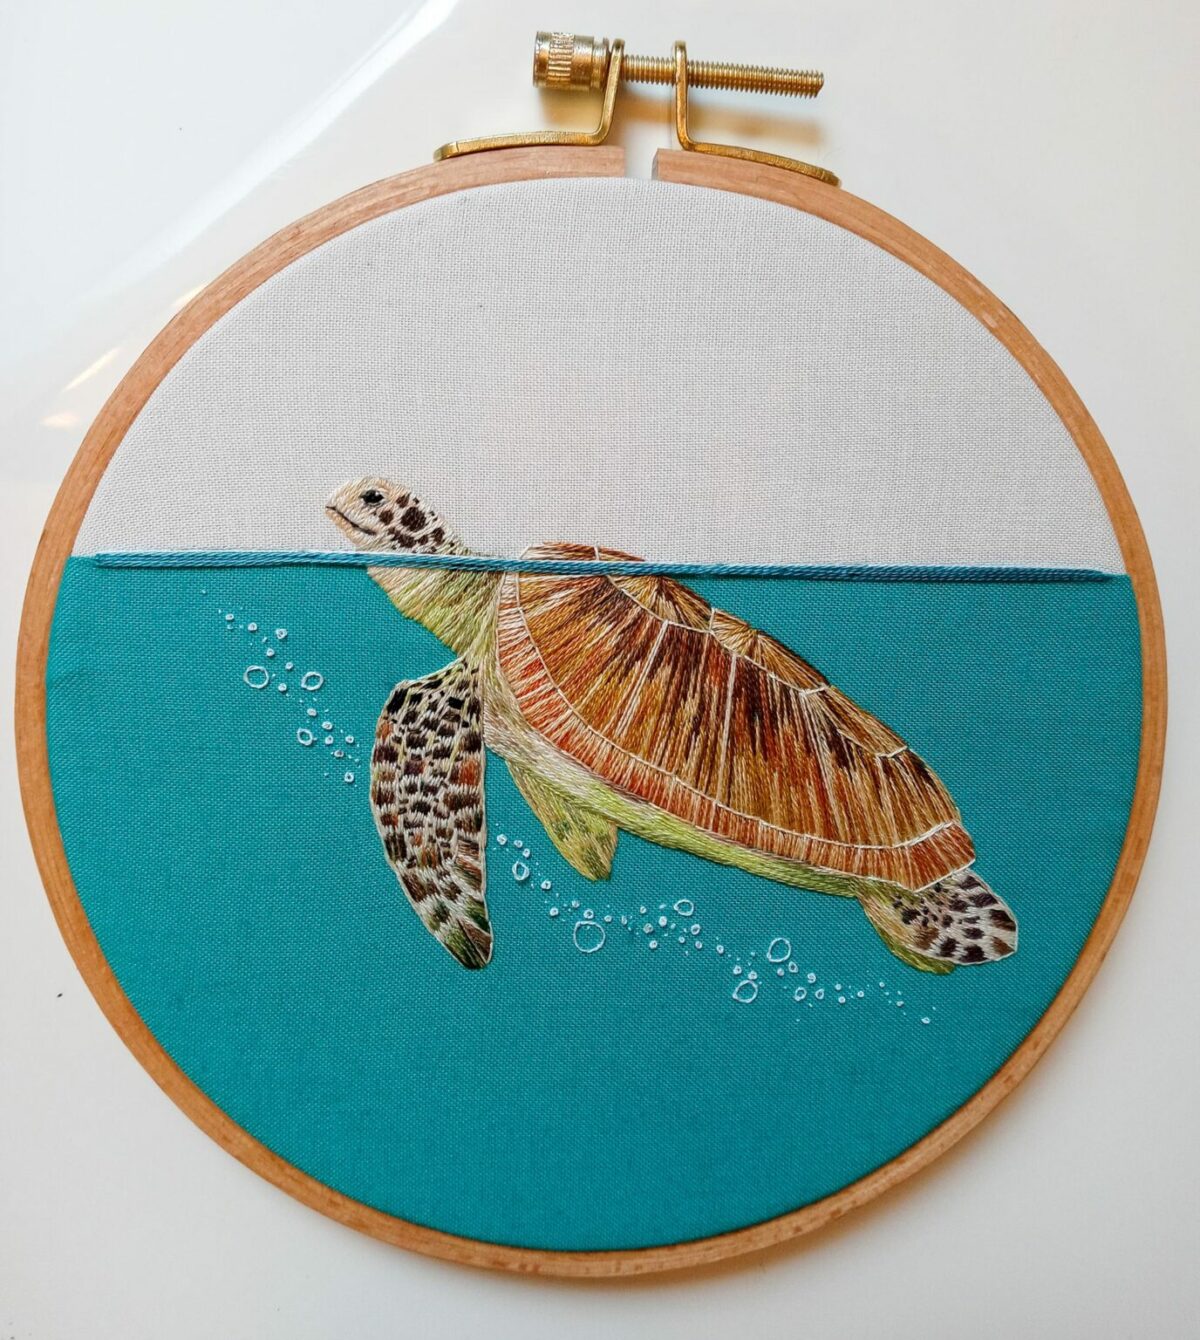 Gorgeous Embroideries Of Animals Plunging Into The Waters By Megan Zaniewski 13